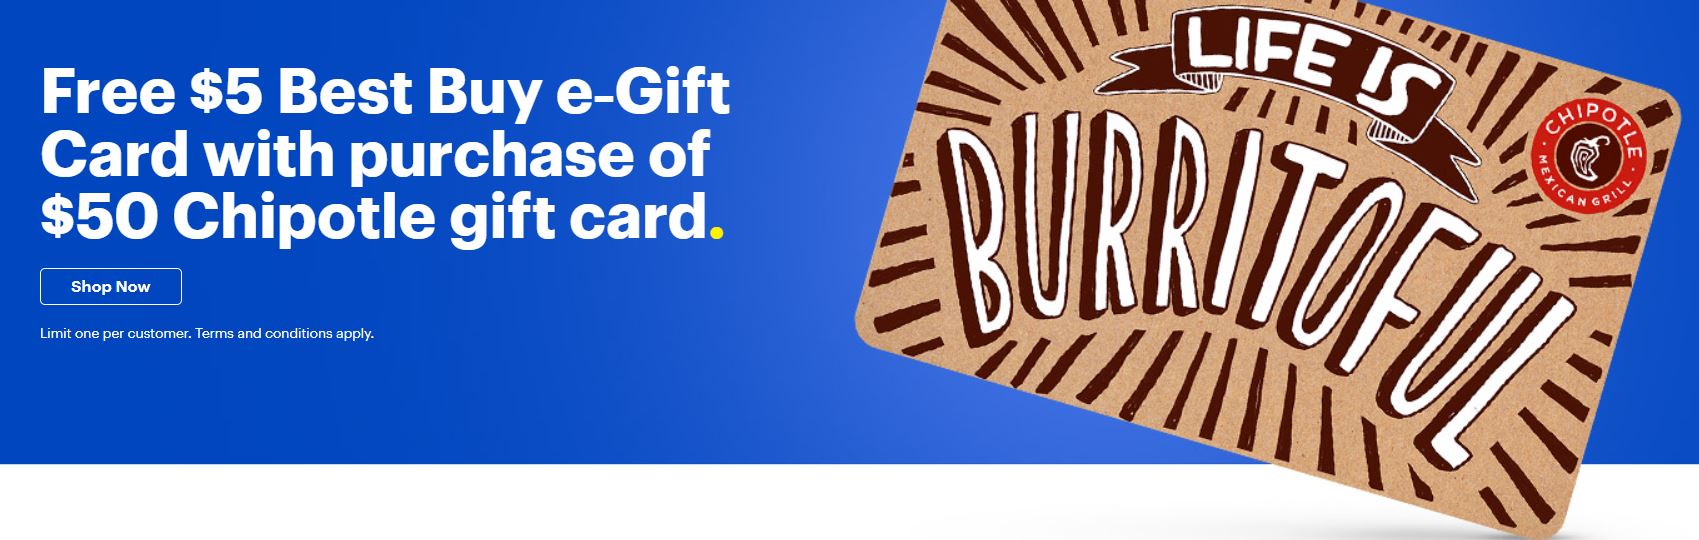 Free $5 Best Buy e‑Gift Card with purchase of $50 Chipotle gift card